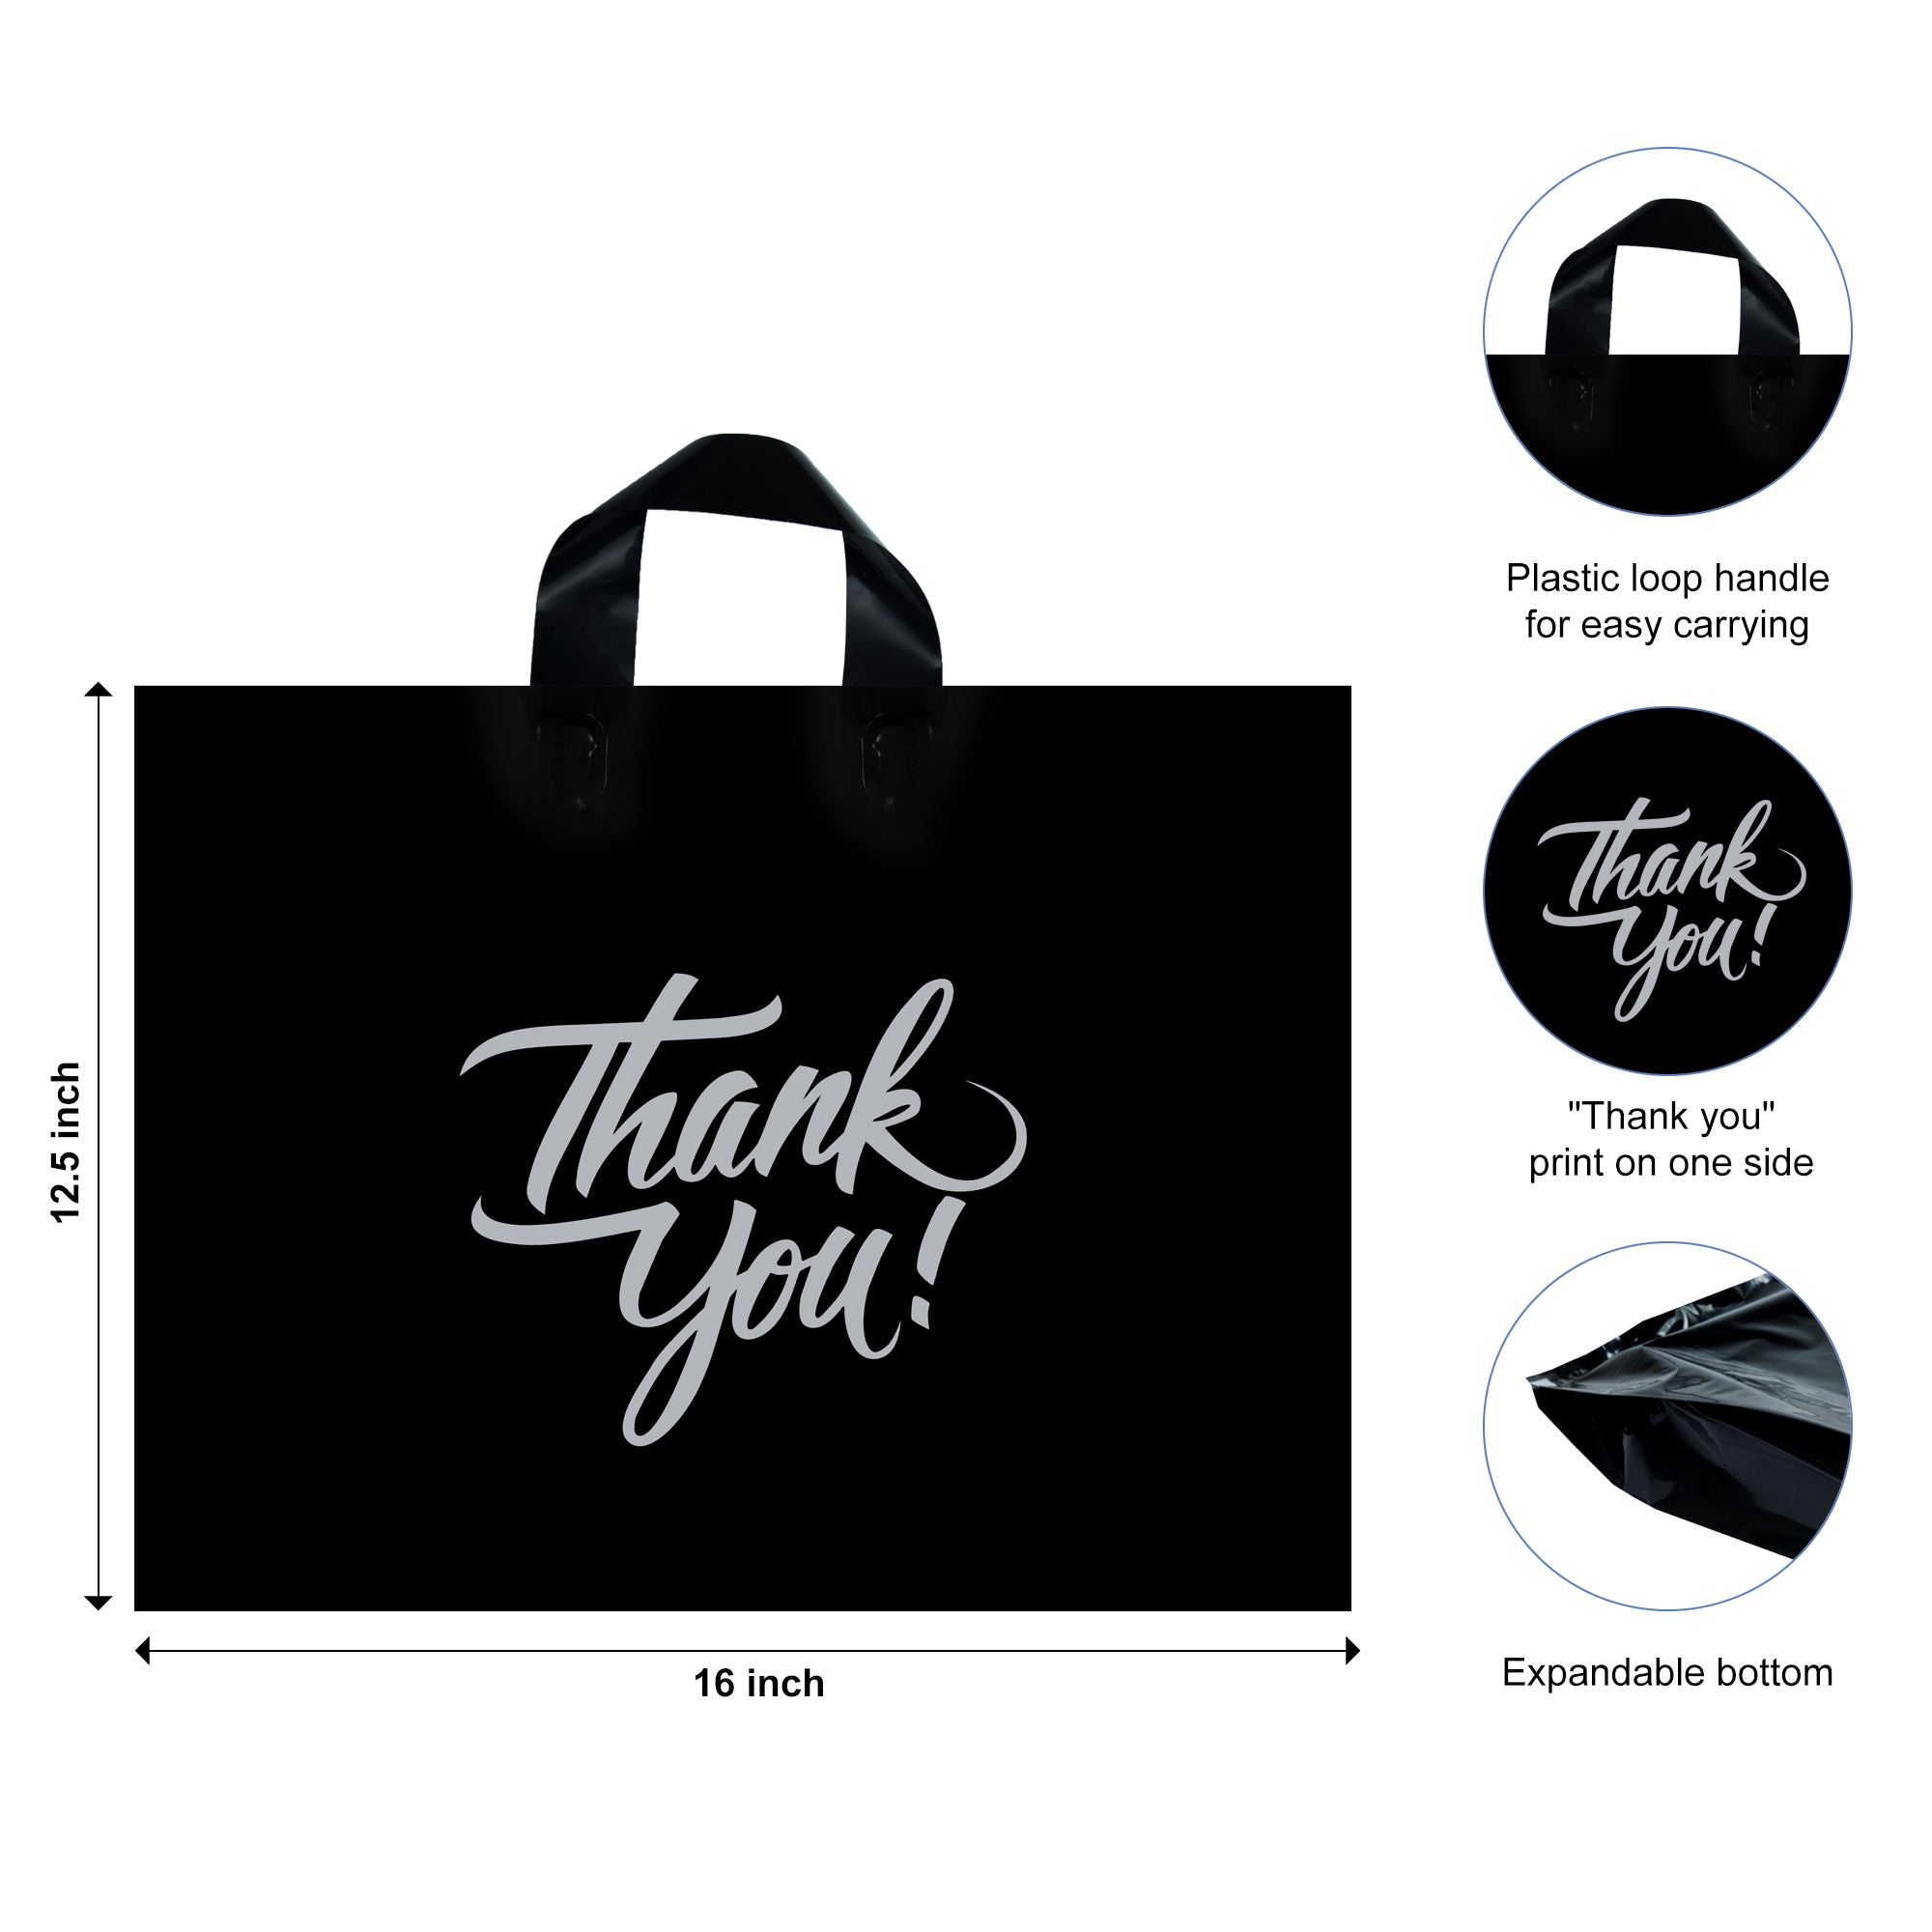 16 x 12.5 black thank you bags with loop handle